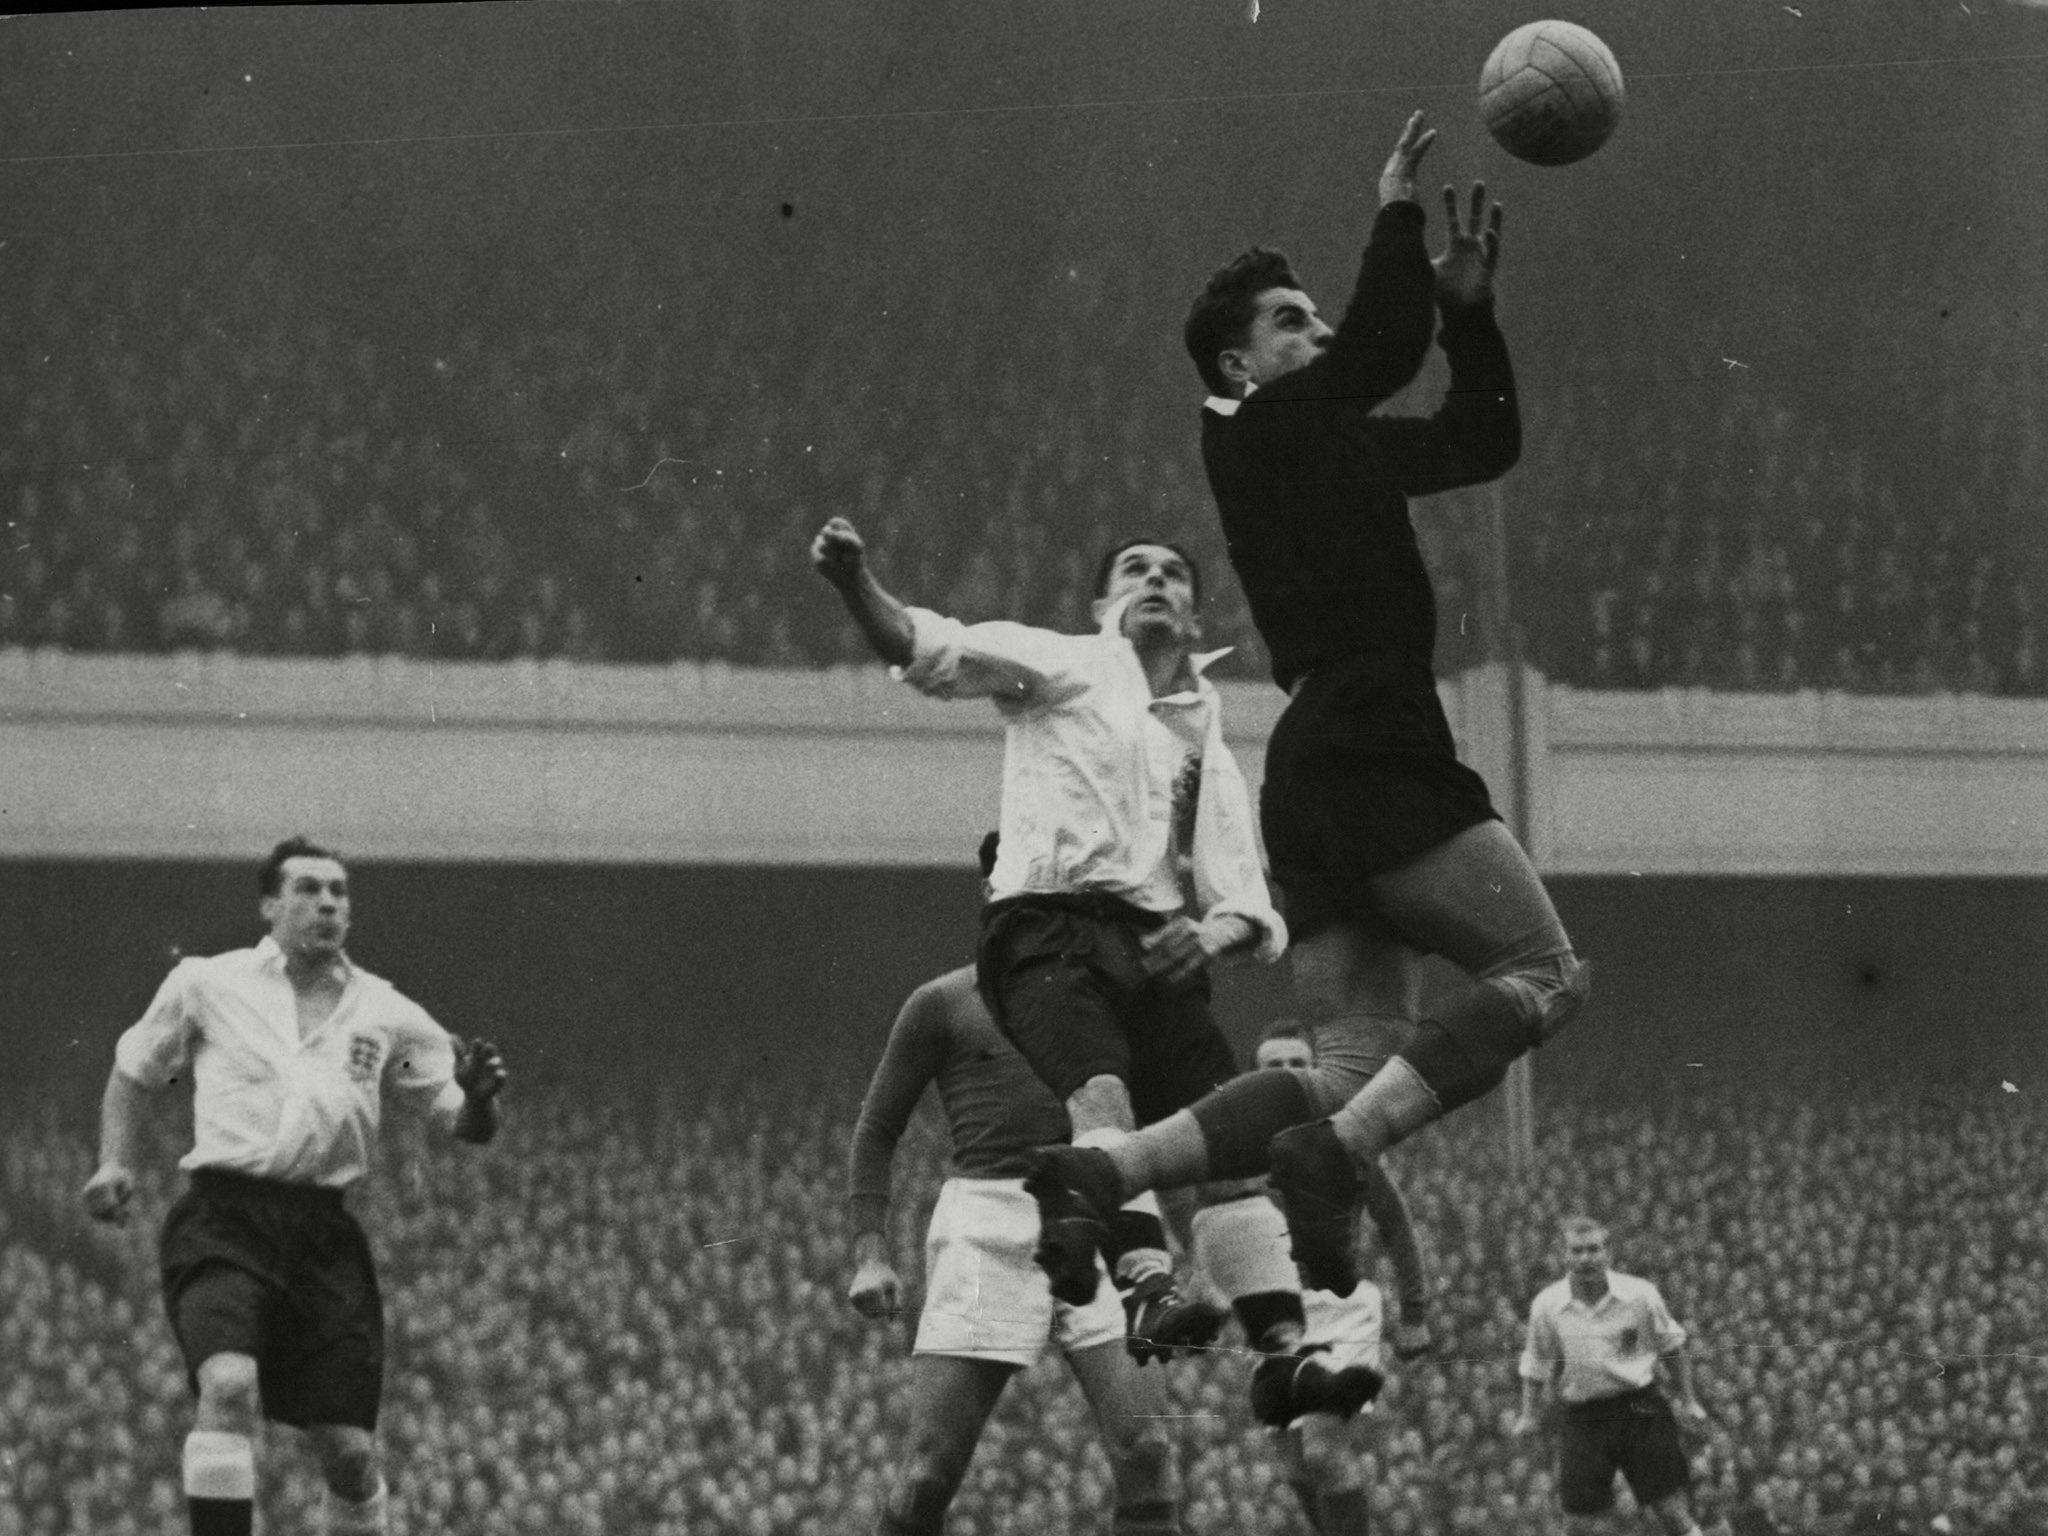 Vladimir Beara: One of the world's finest goalkeepers, who played